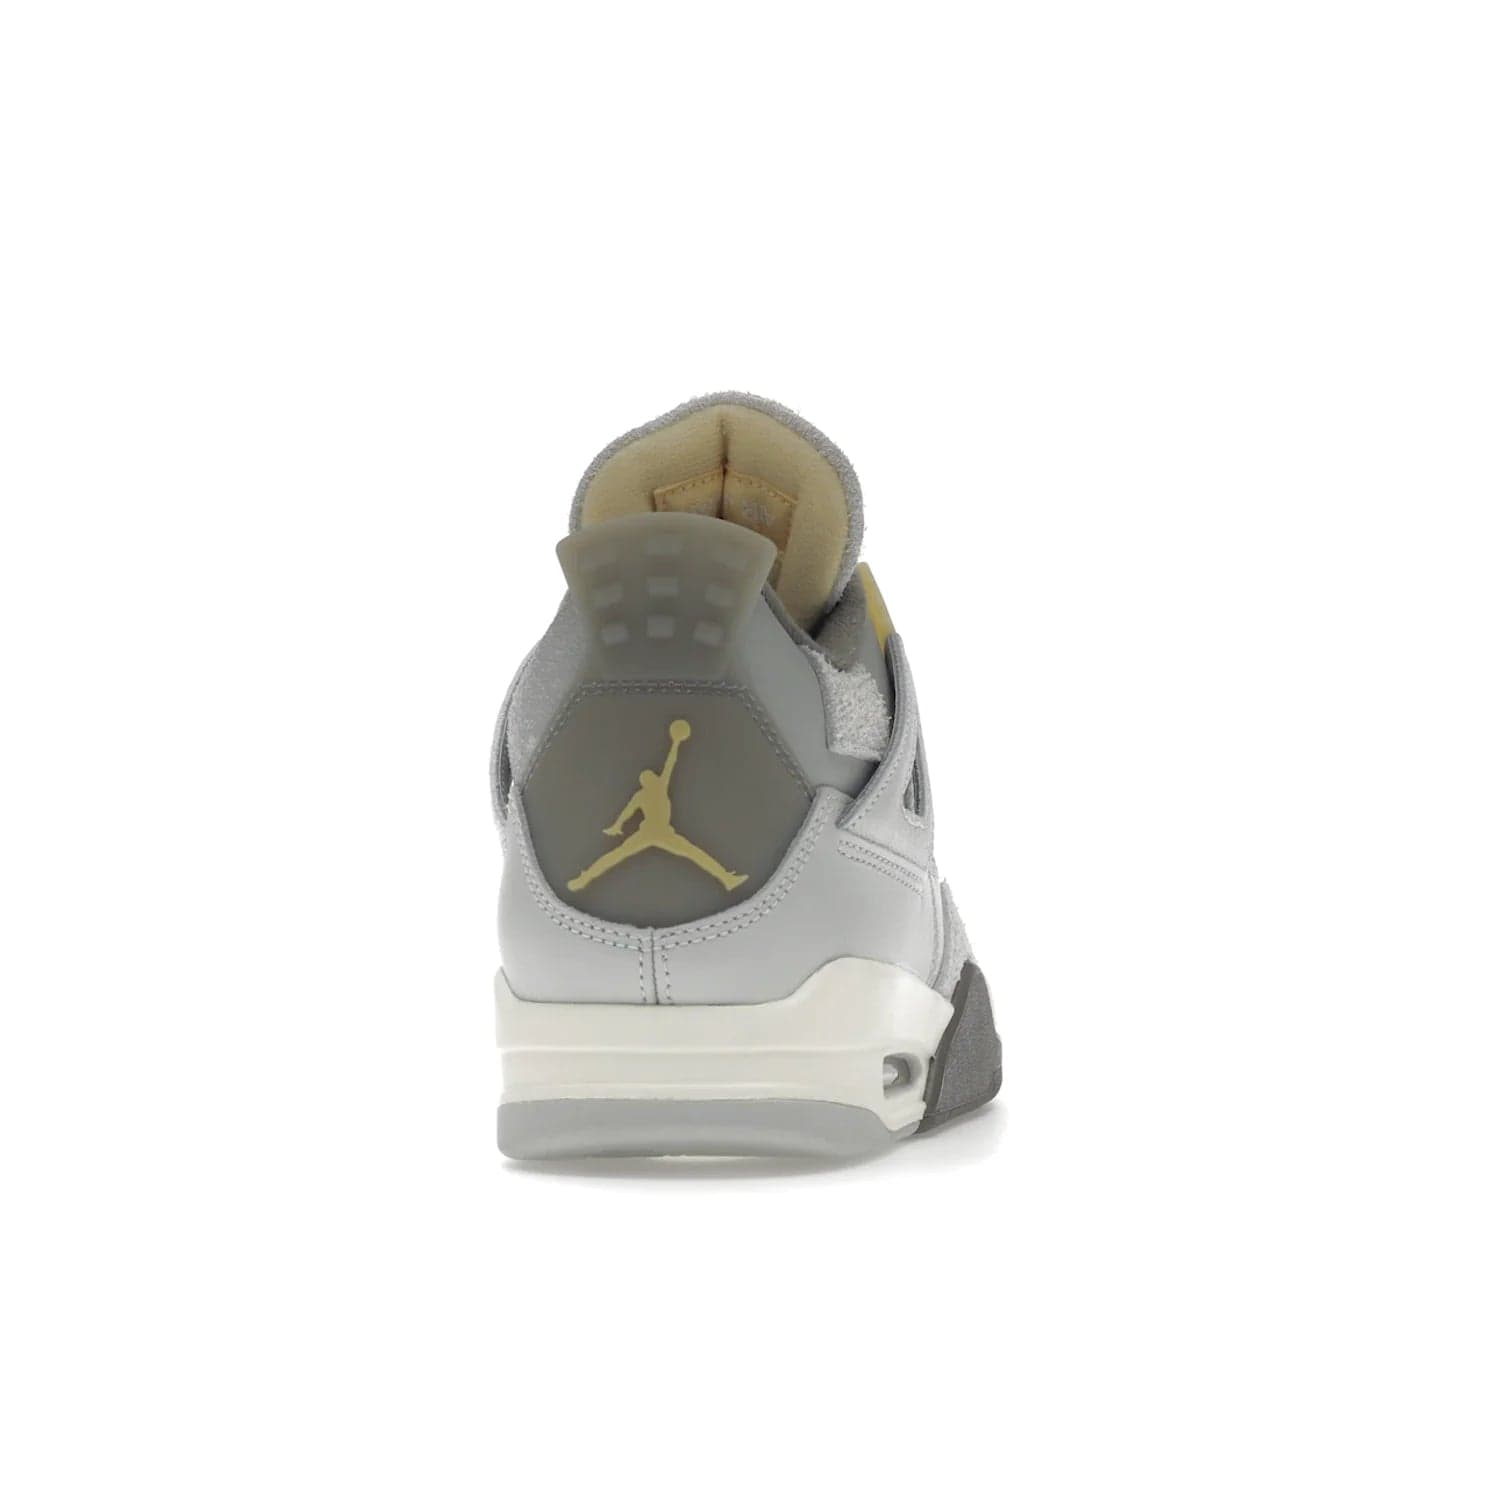 Jordan 4 Retro SE Craft Photon Dust - Image 29 - Only at www.BallersClubKickz.com - Upgrade your shoe collection with the Air Jordan 4 Retro SE Craft Photon Dust. This luxurious sneaker features a combination of suede and leather with unique grey tones like Photon Dust, Pale Vanilla, Off White, Grey Fog, Flat Pewter, and Sail. Available February 11, 2023.